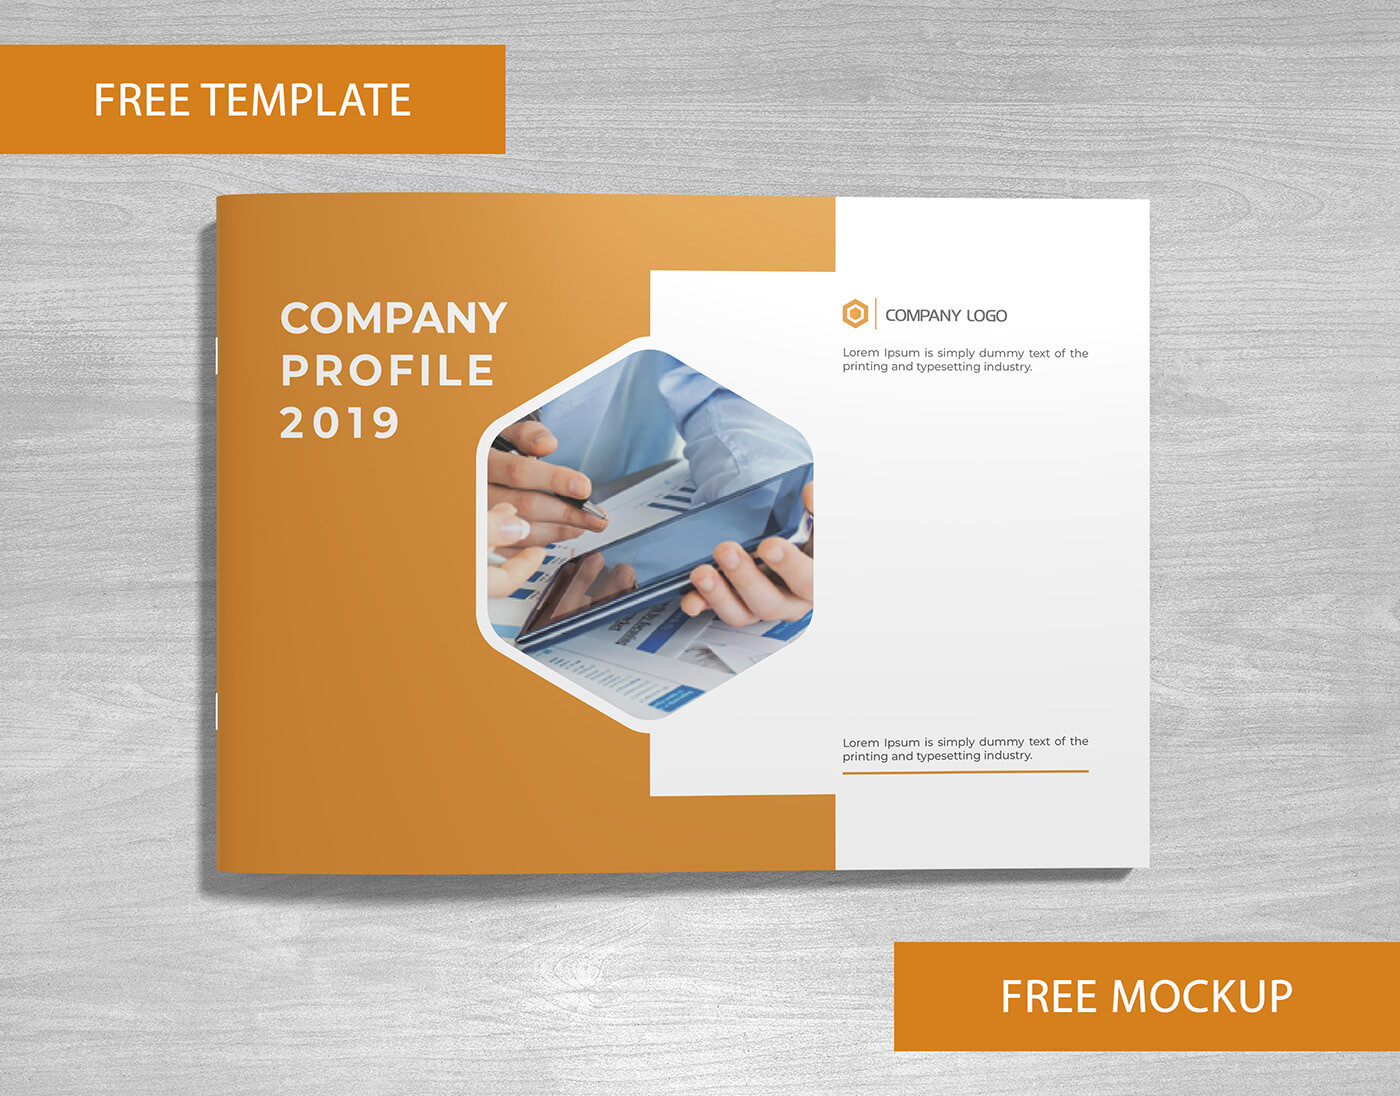 Company Profile Free Template And Mockup Download On Behance Pertaining To Free Brochure Template Downloads